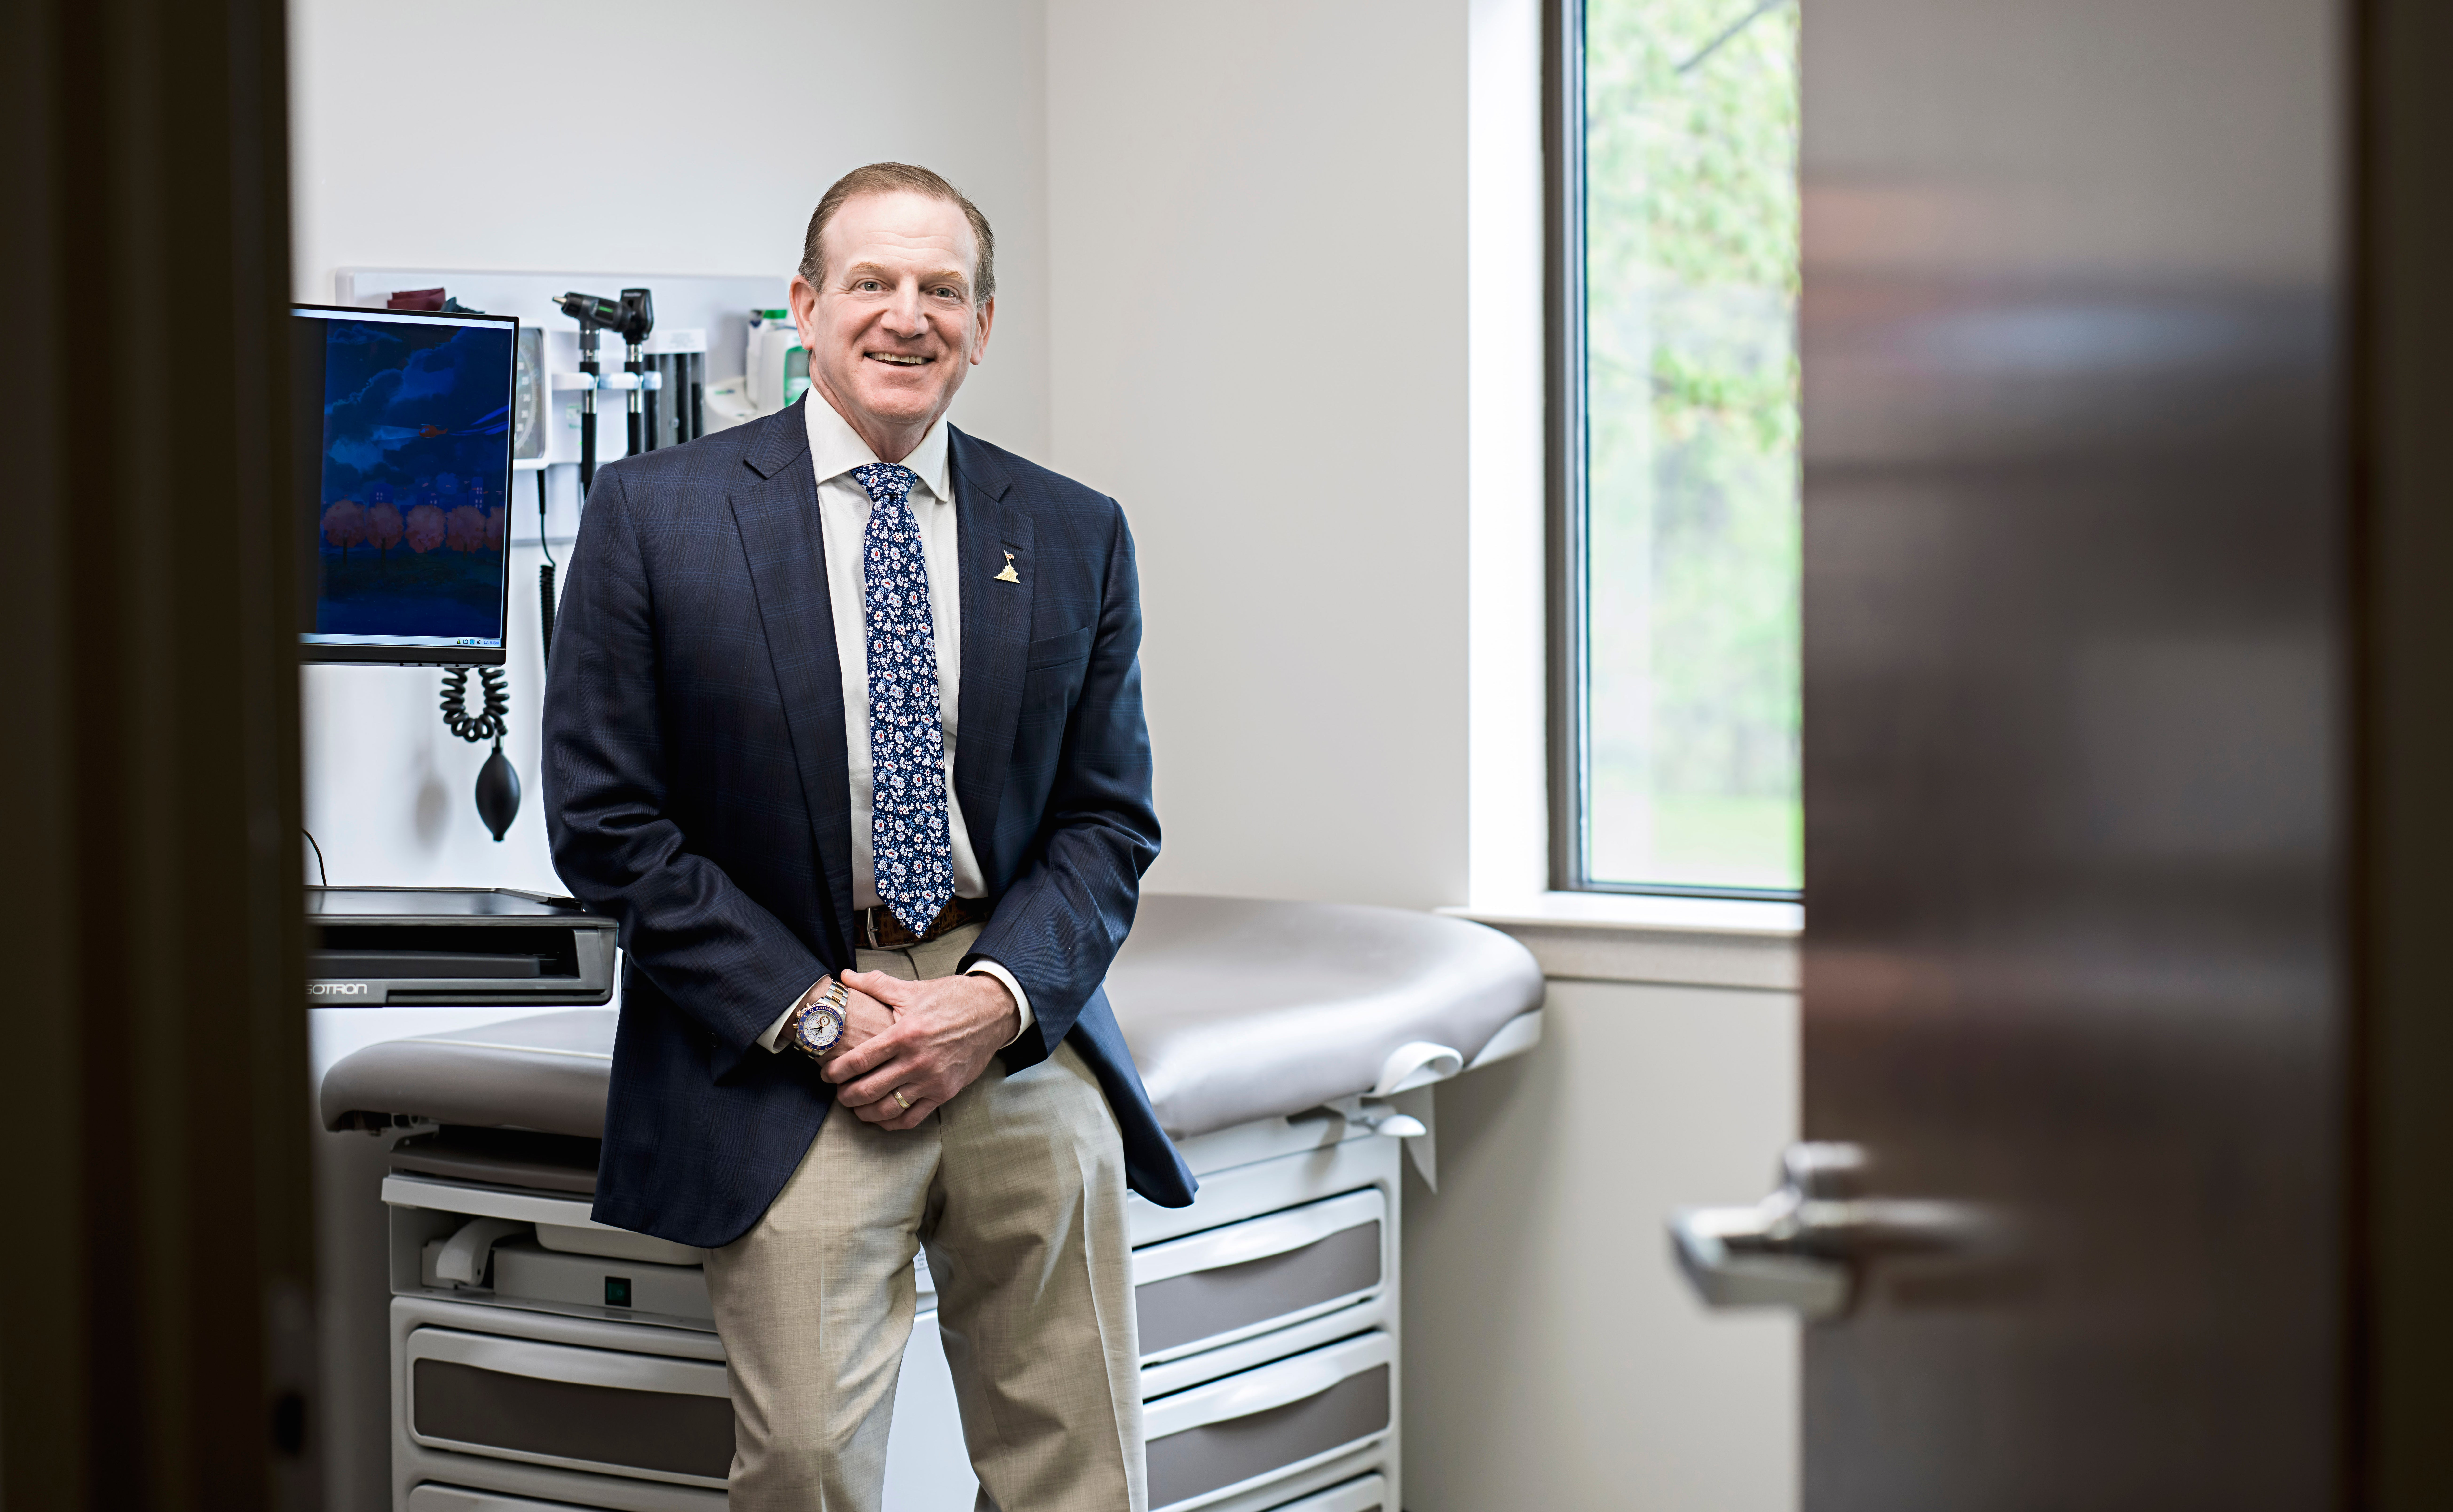 Eric Lebby, MD, is latest to benefit from in-depth care provided by Executive Health Program